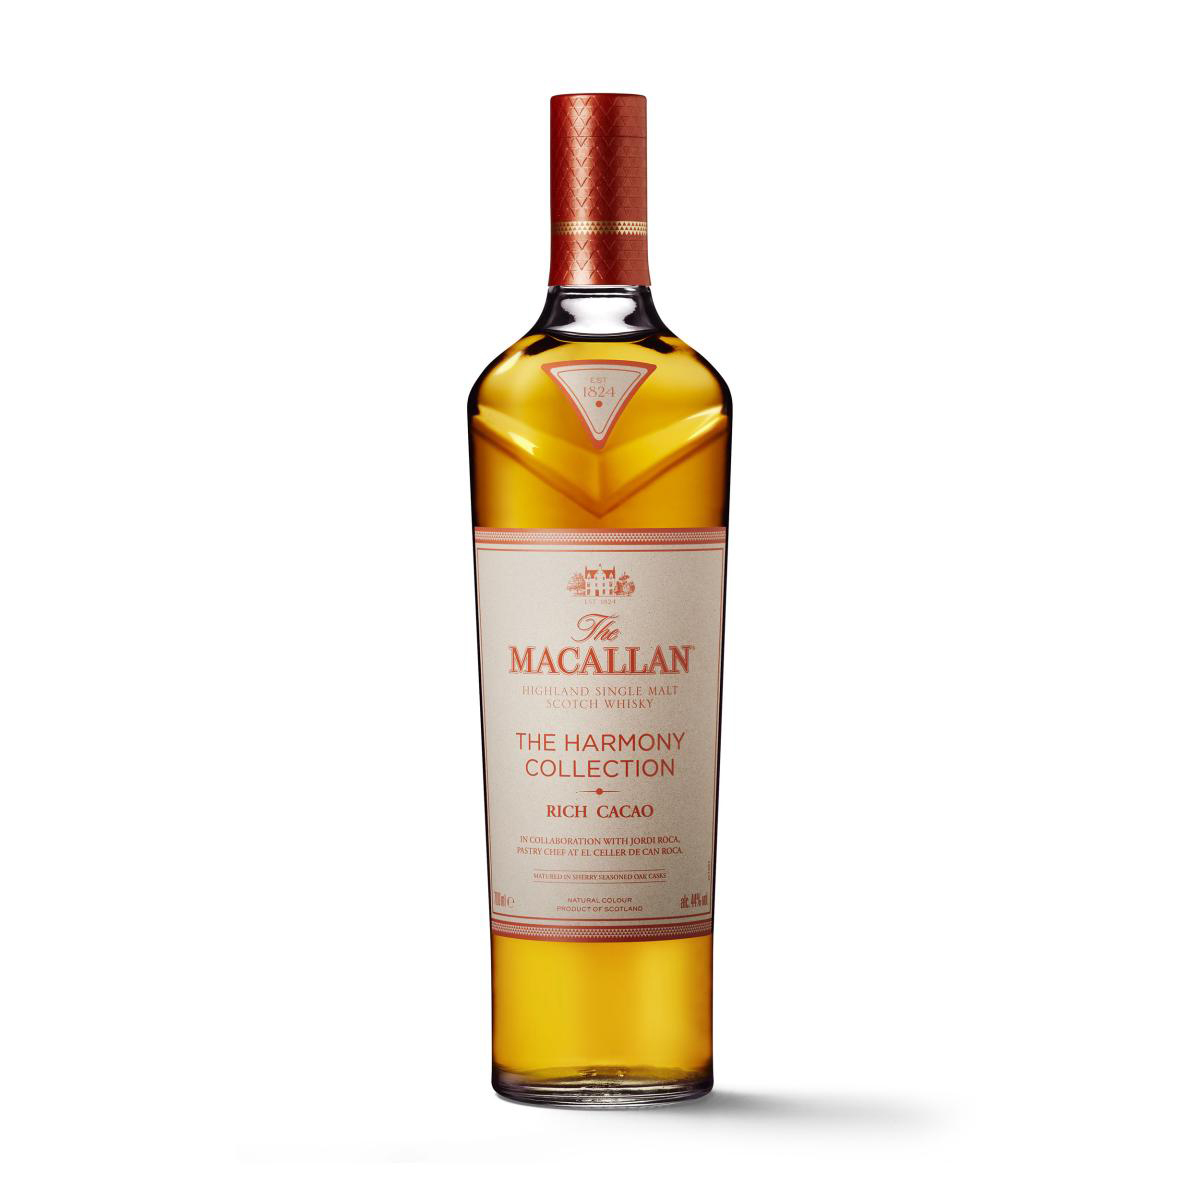 The Macallan The Harmony Collection Set4